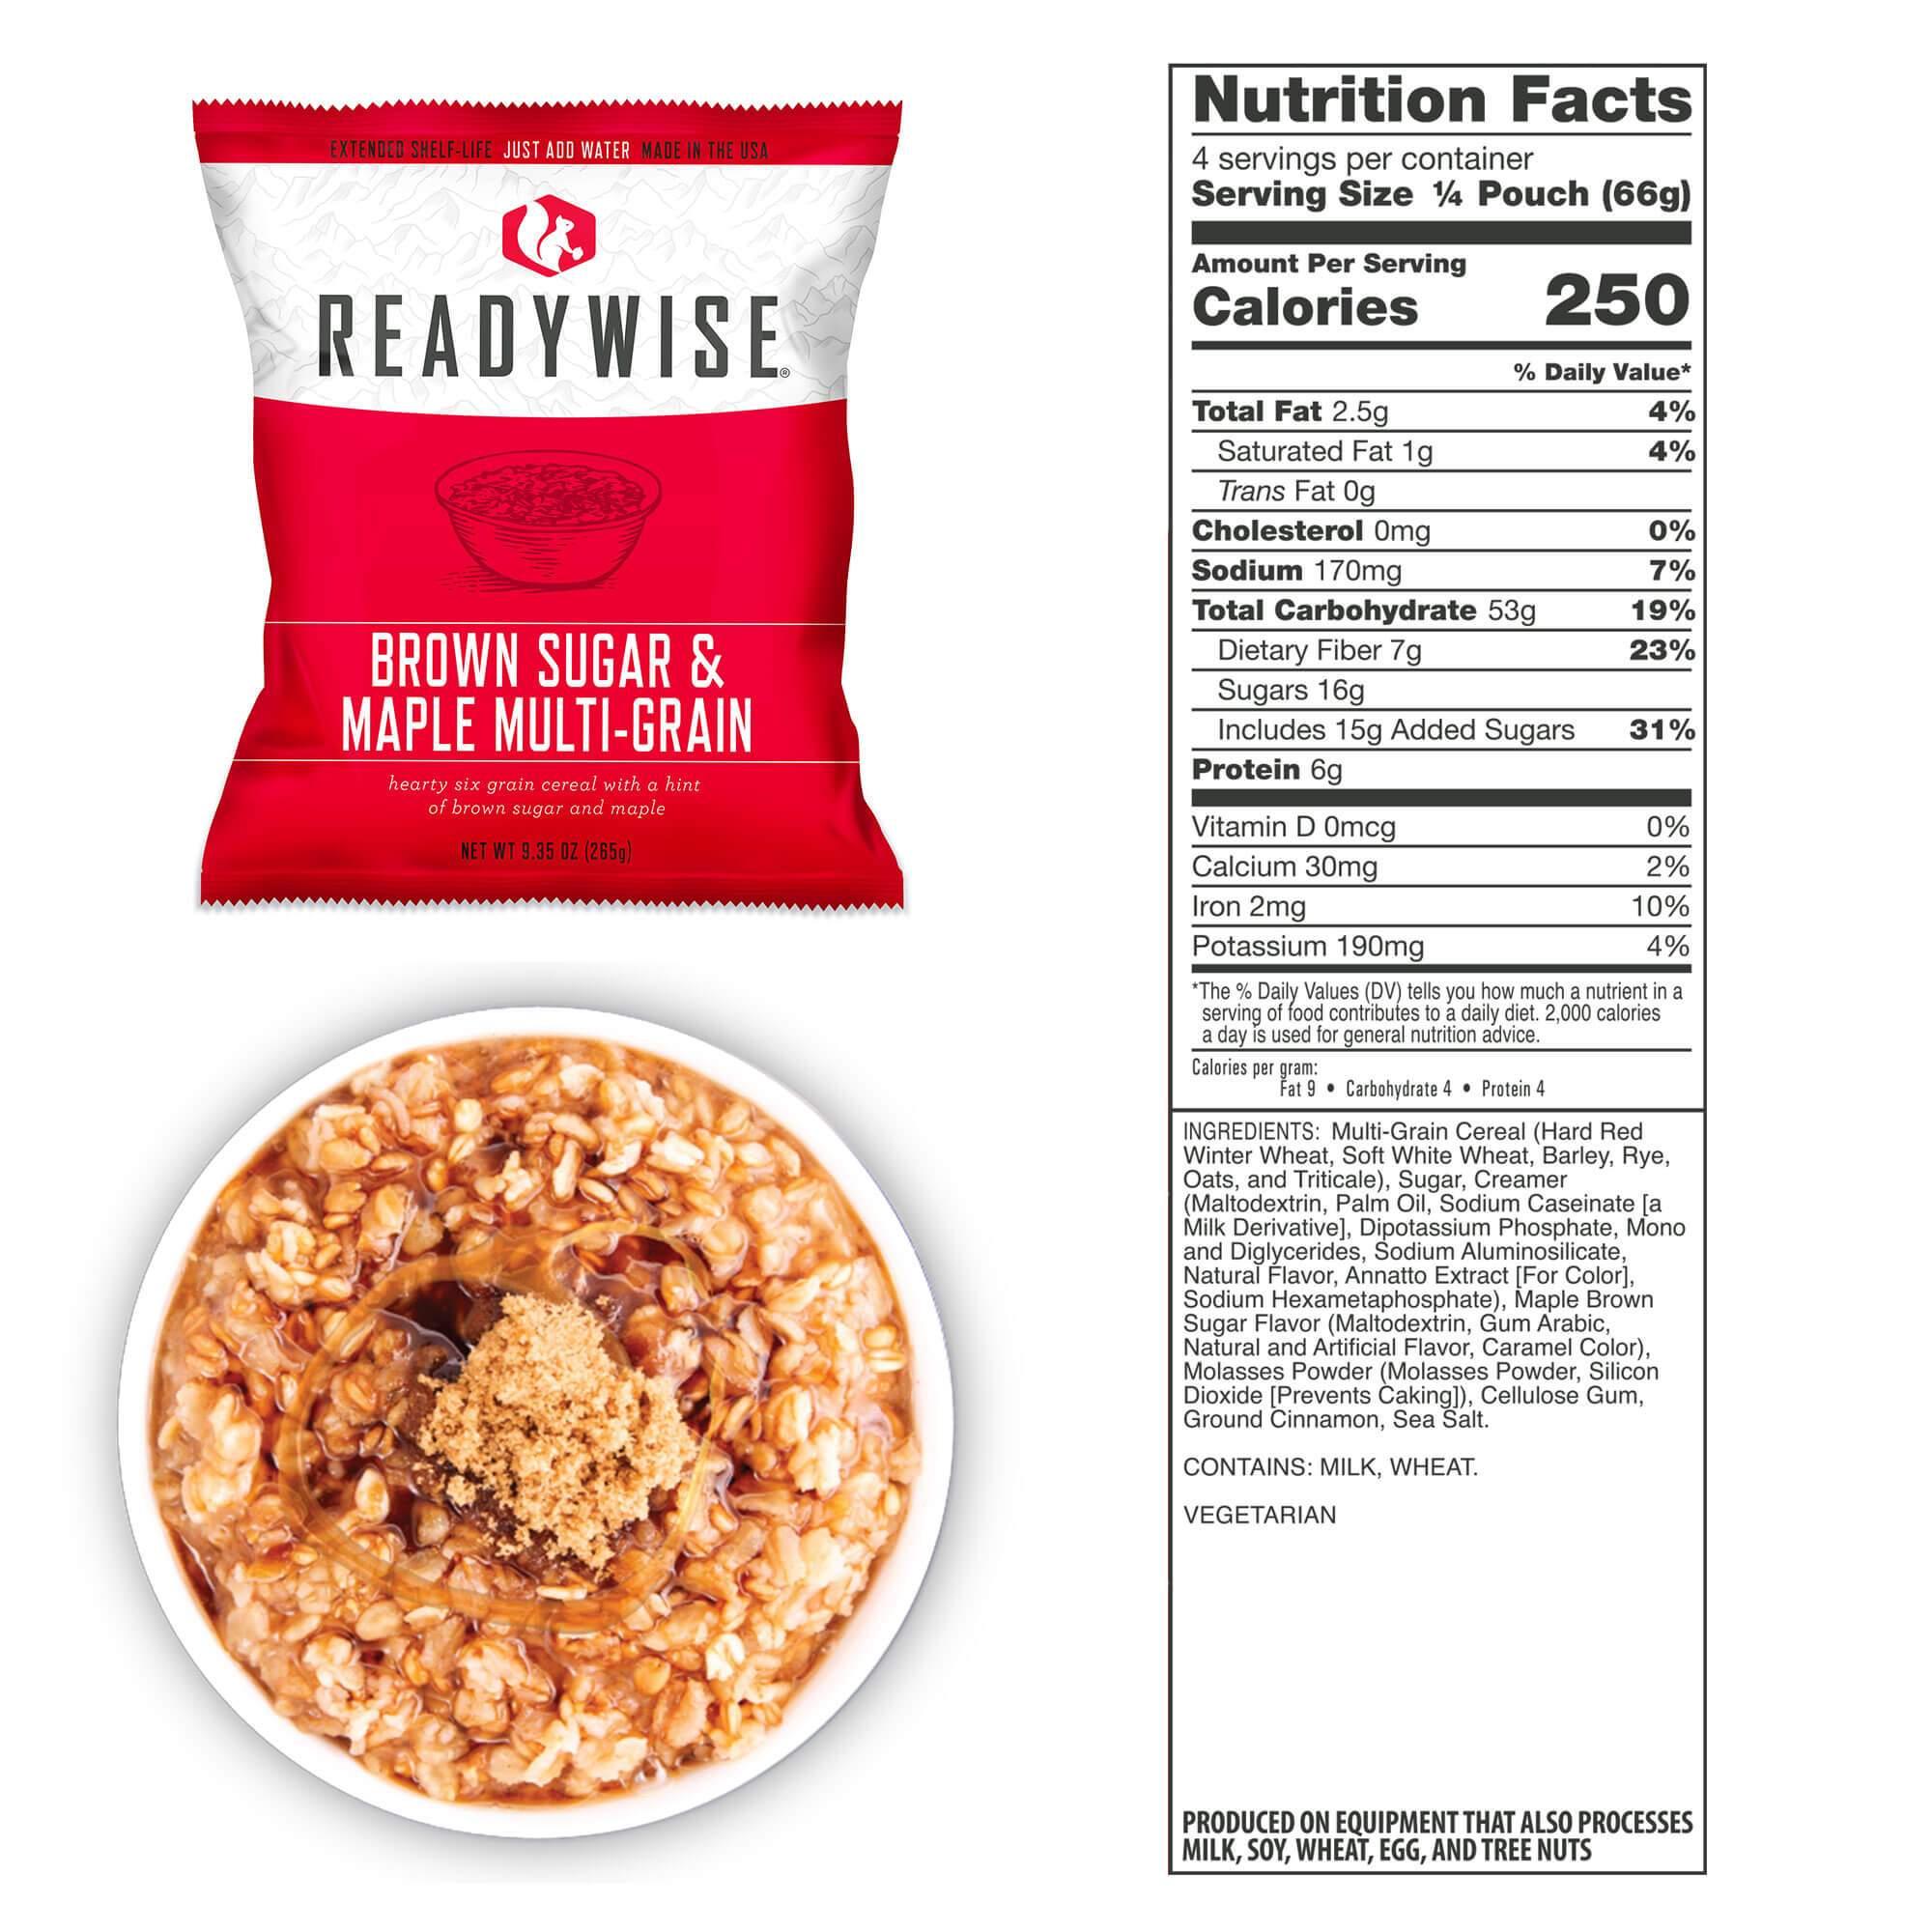 American Red Cross 7-Day Ready to Go Meal Kit - ReadyWise